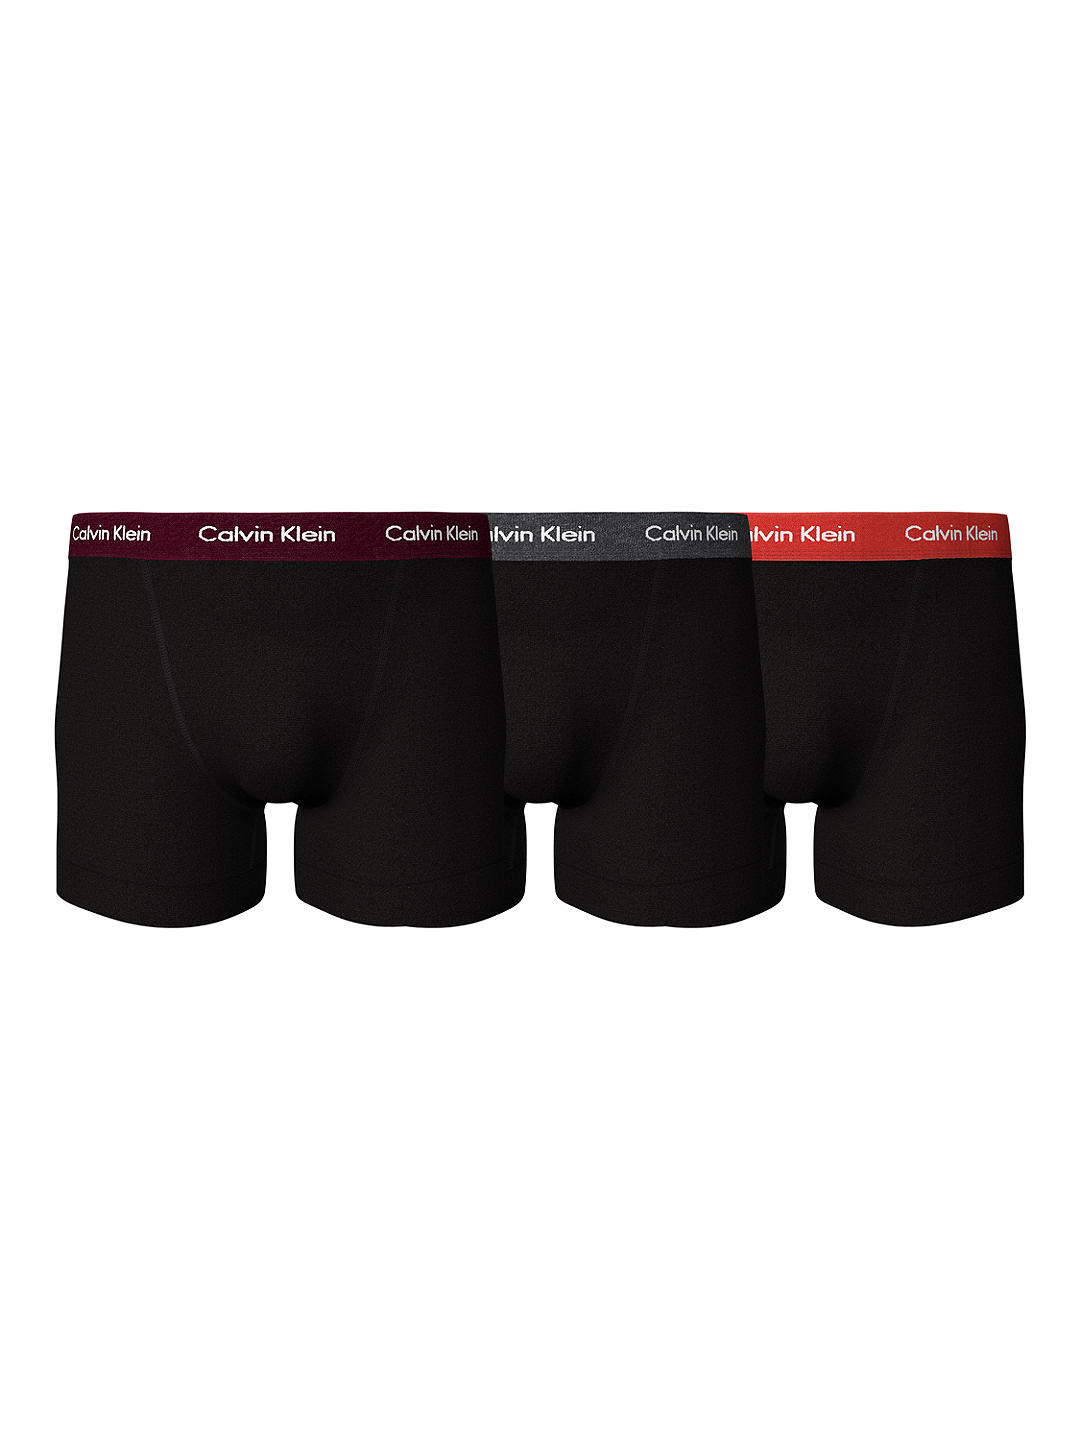 Calvin Klein Modern Structure Colour Band Trunks, Pack of 3